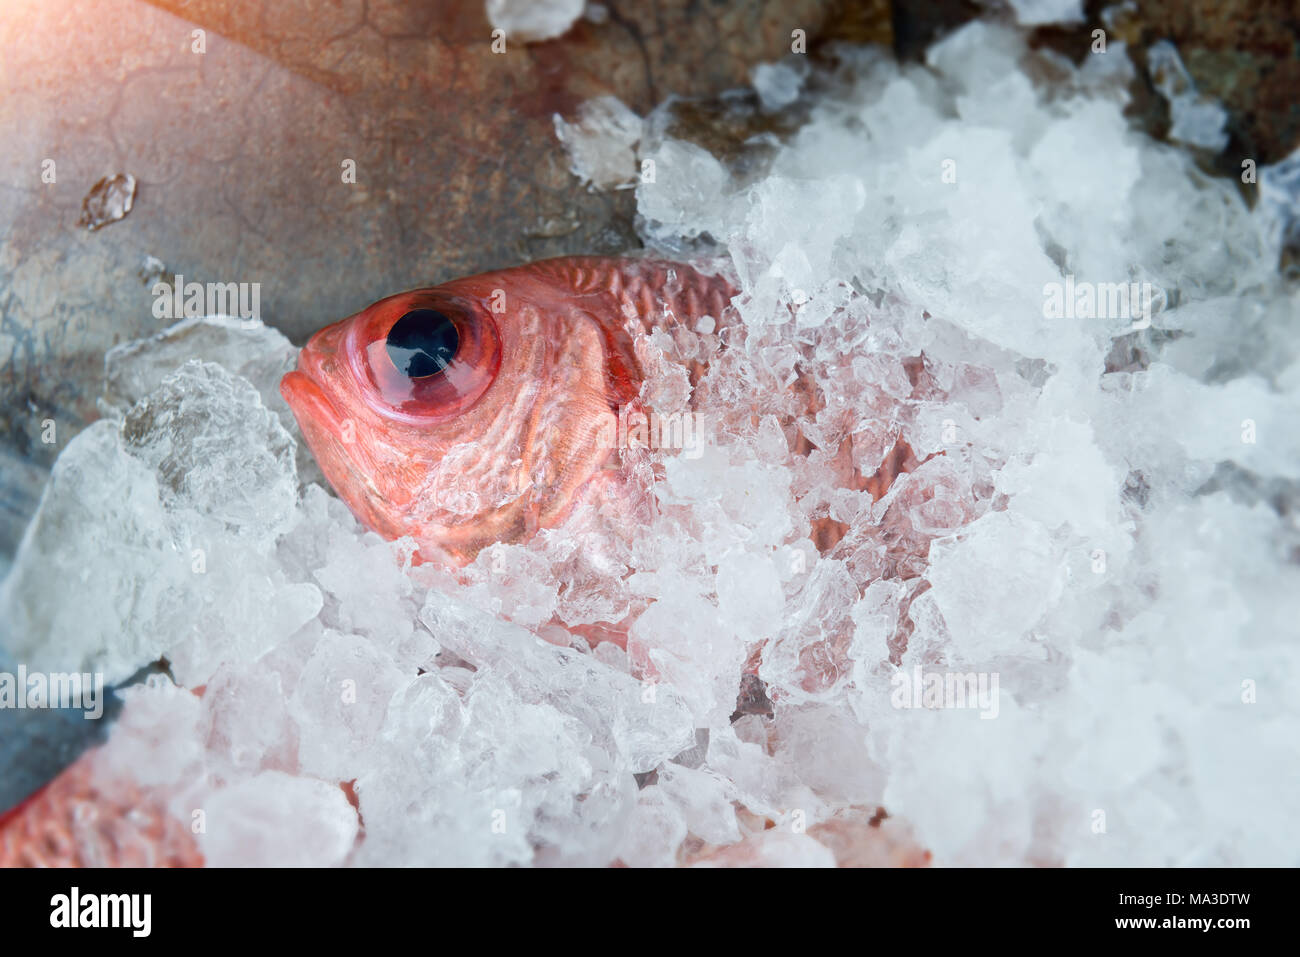 Red Pinecone soldier fish  photo in daylight time show big eyes and pink scales. Stock Photo